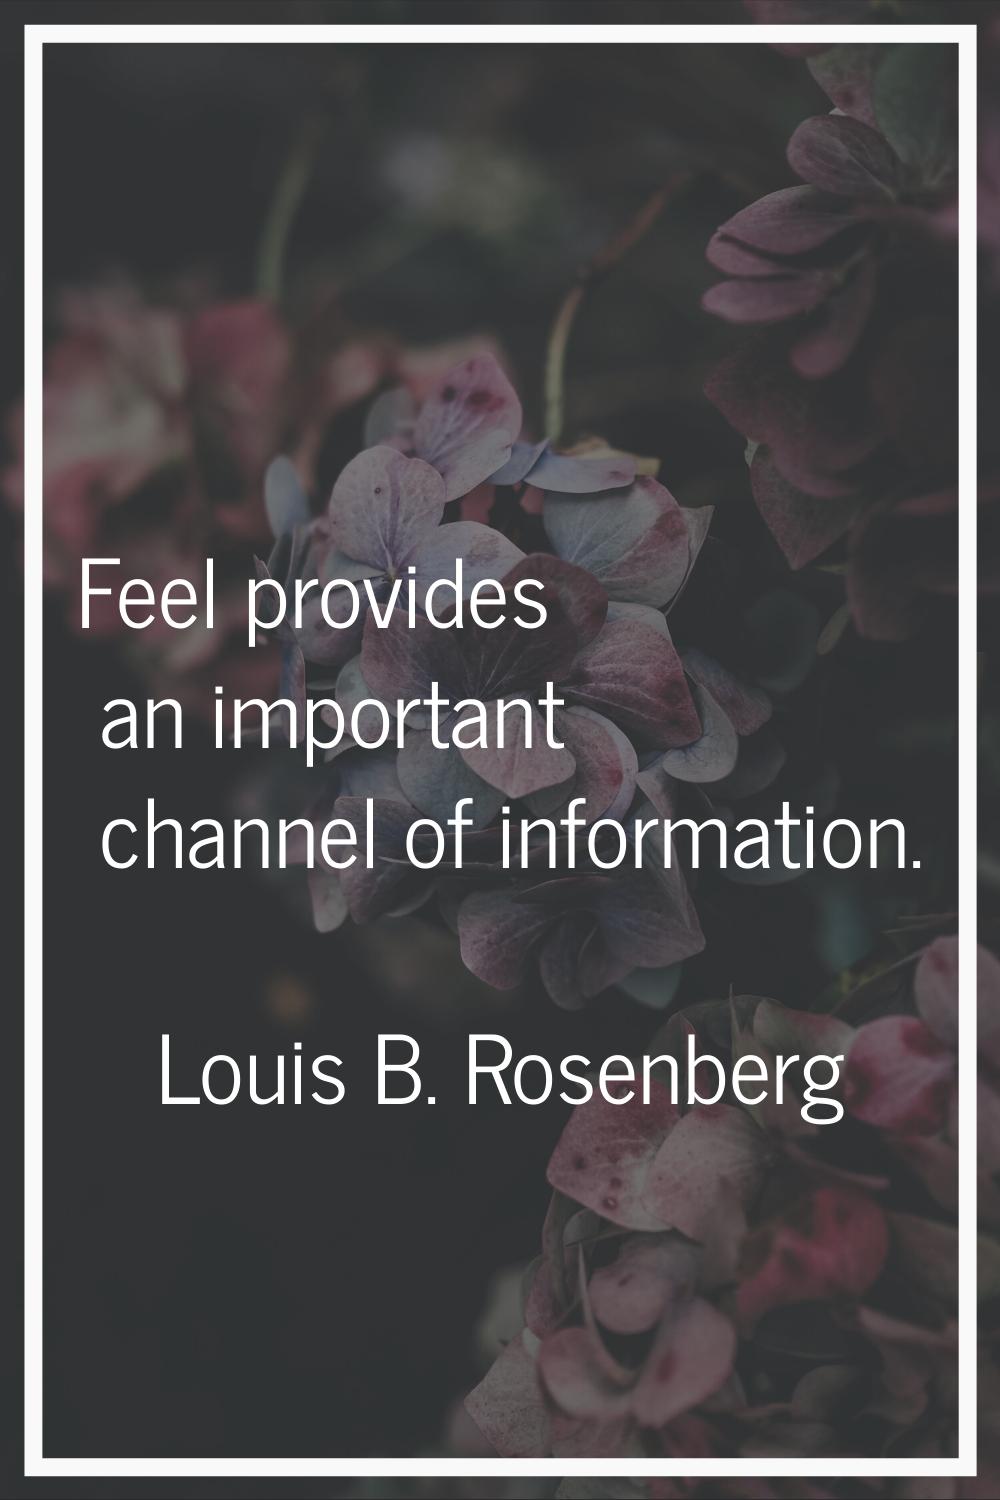 Feel provides an important channel of information.